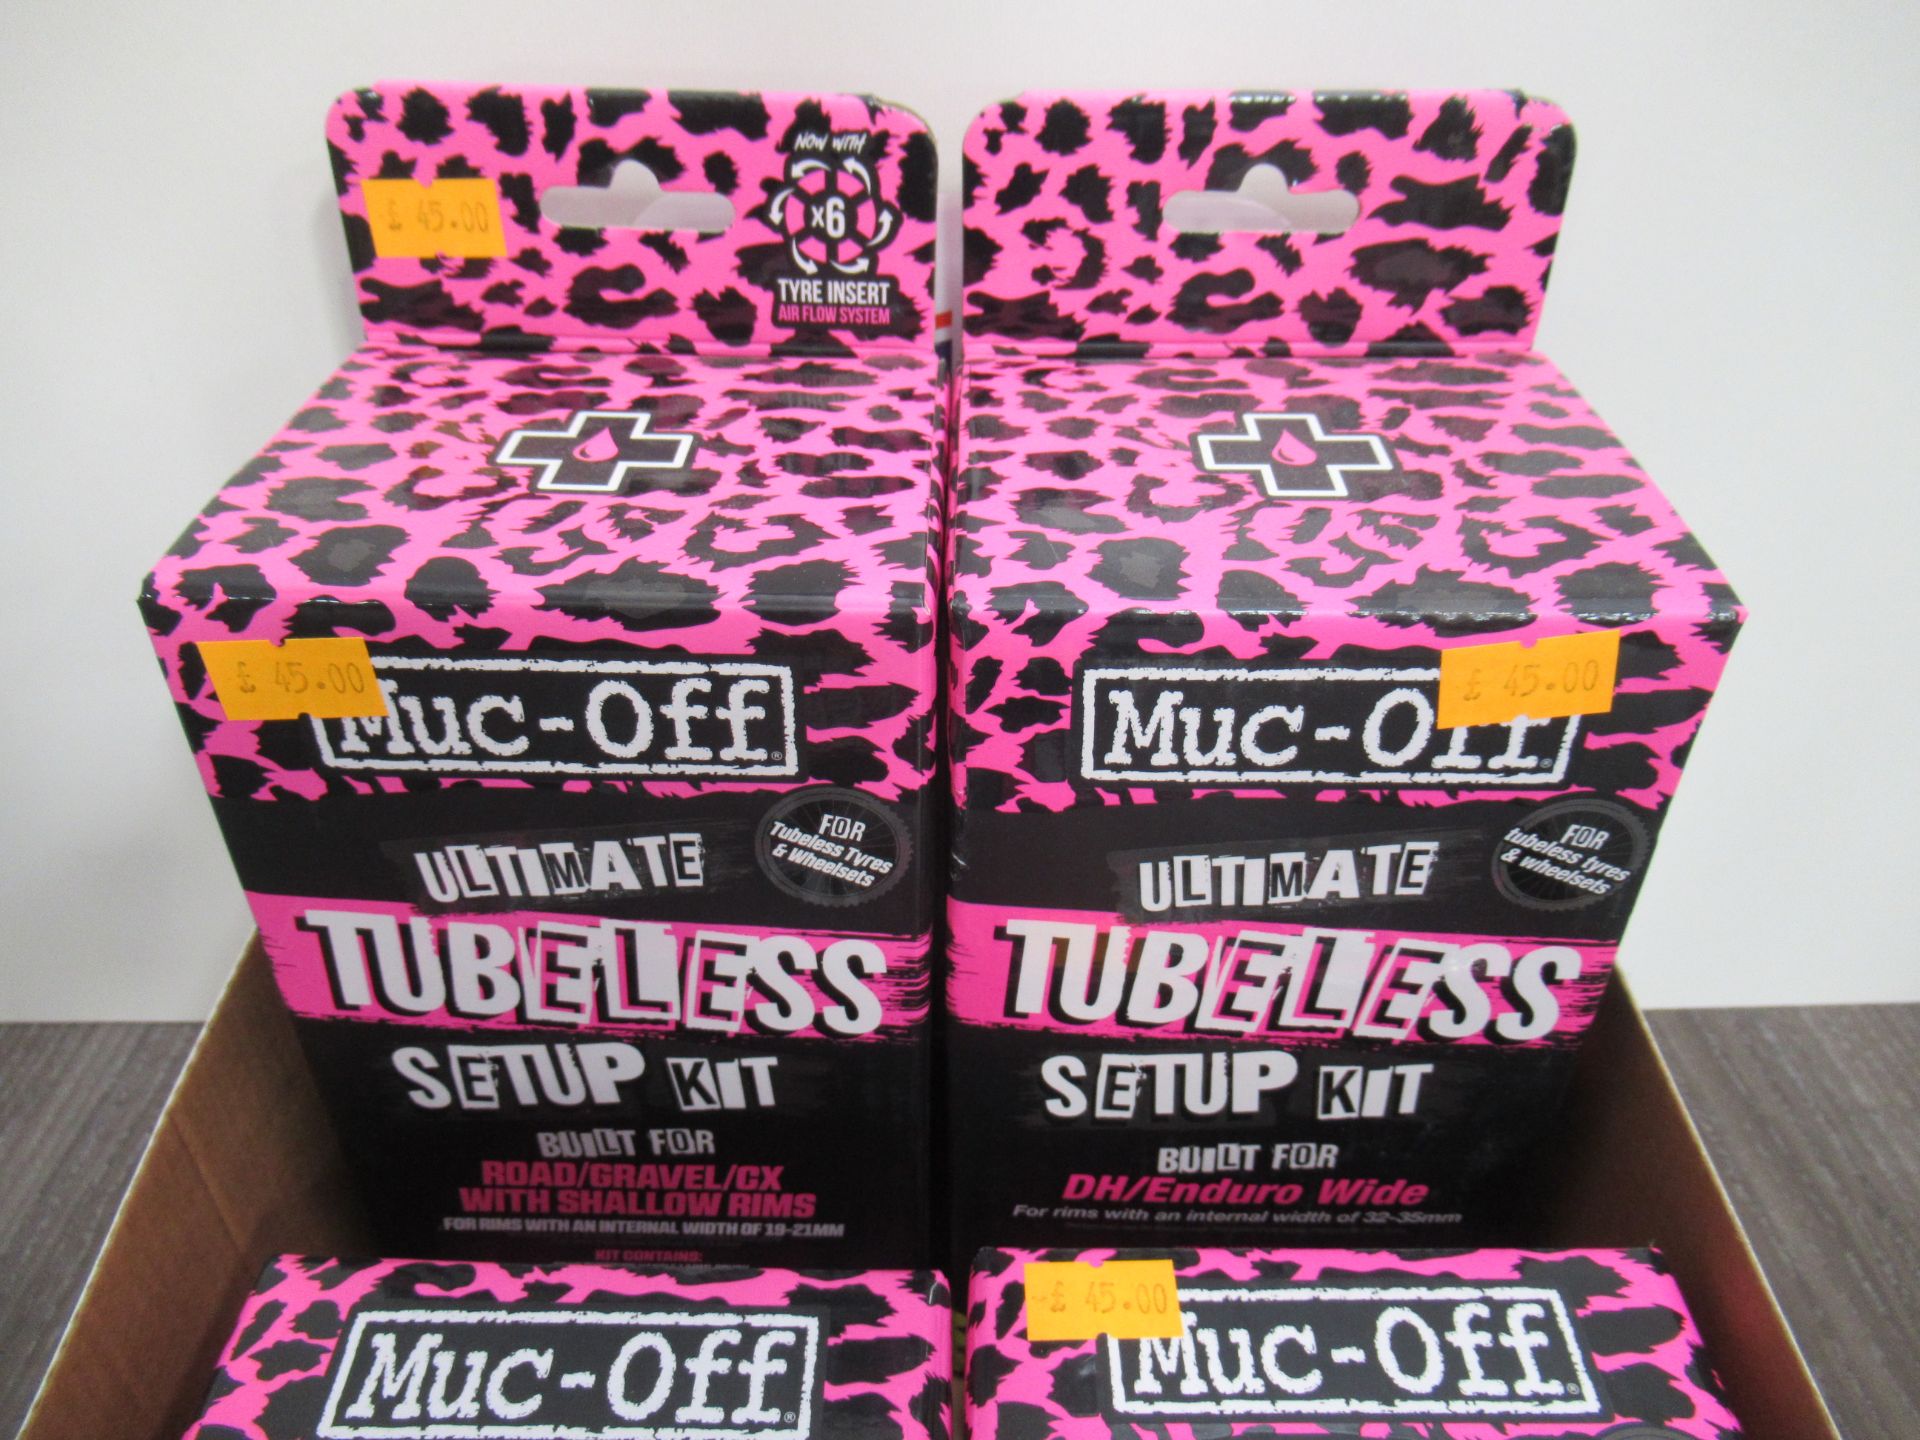 4 x Muc-Off Tubeless Set-Up Kits - 2 x Road/Gravel/CX with deep rims and 2 x DH/Enduro/Trail (RRP£45 - Image 3 of 3